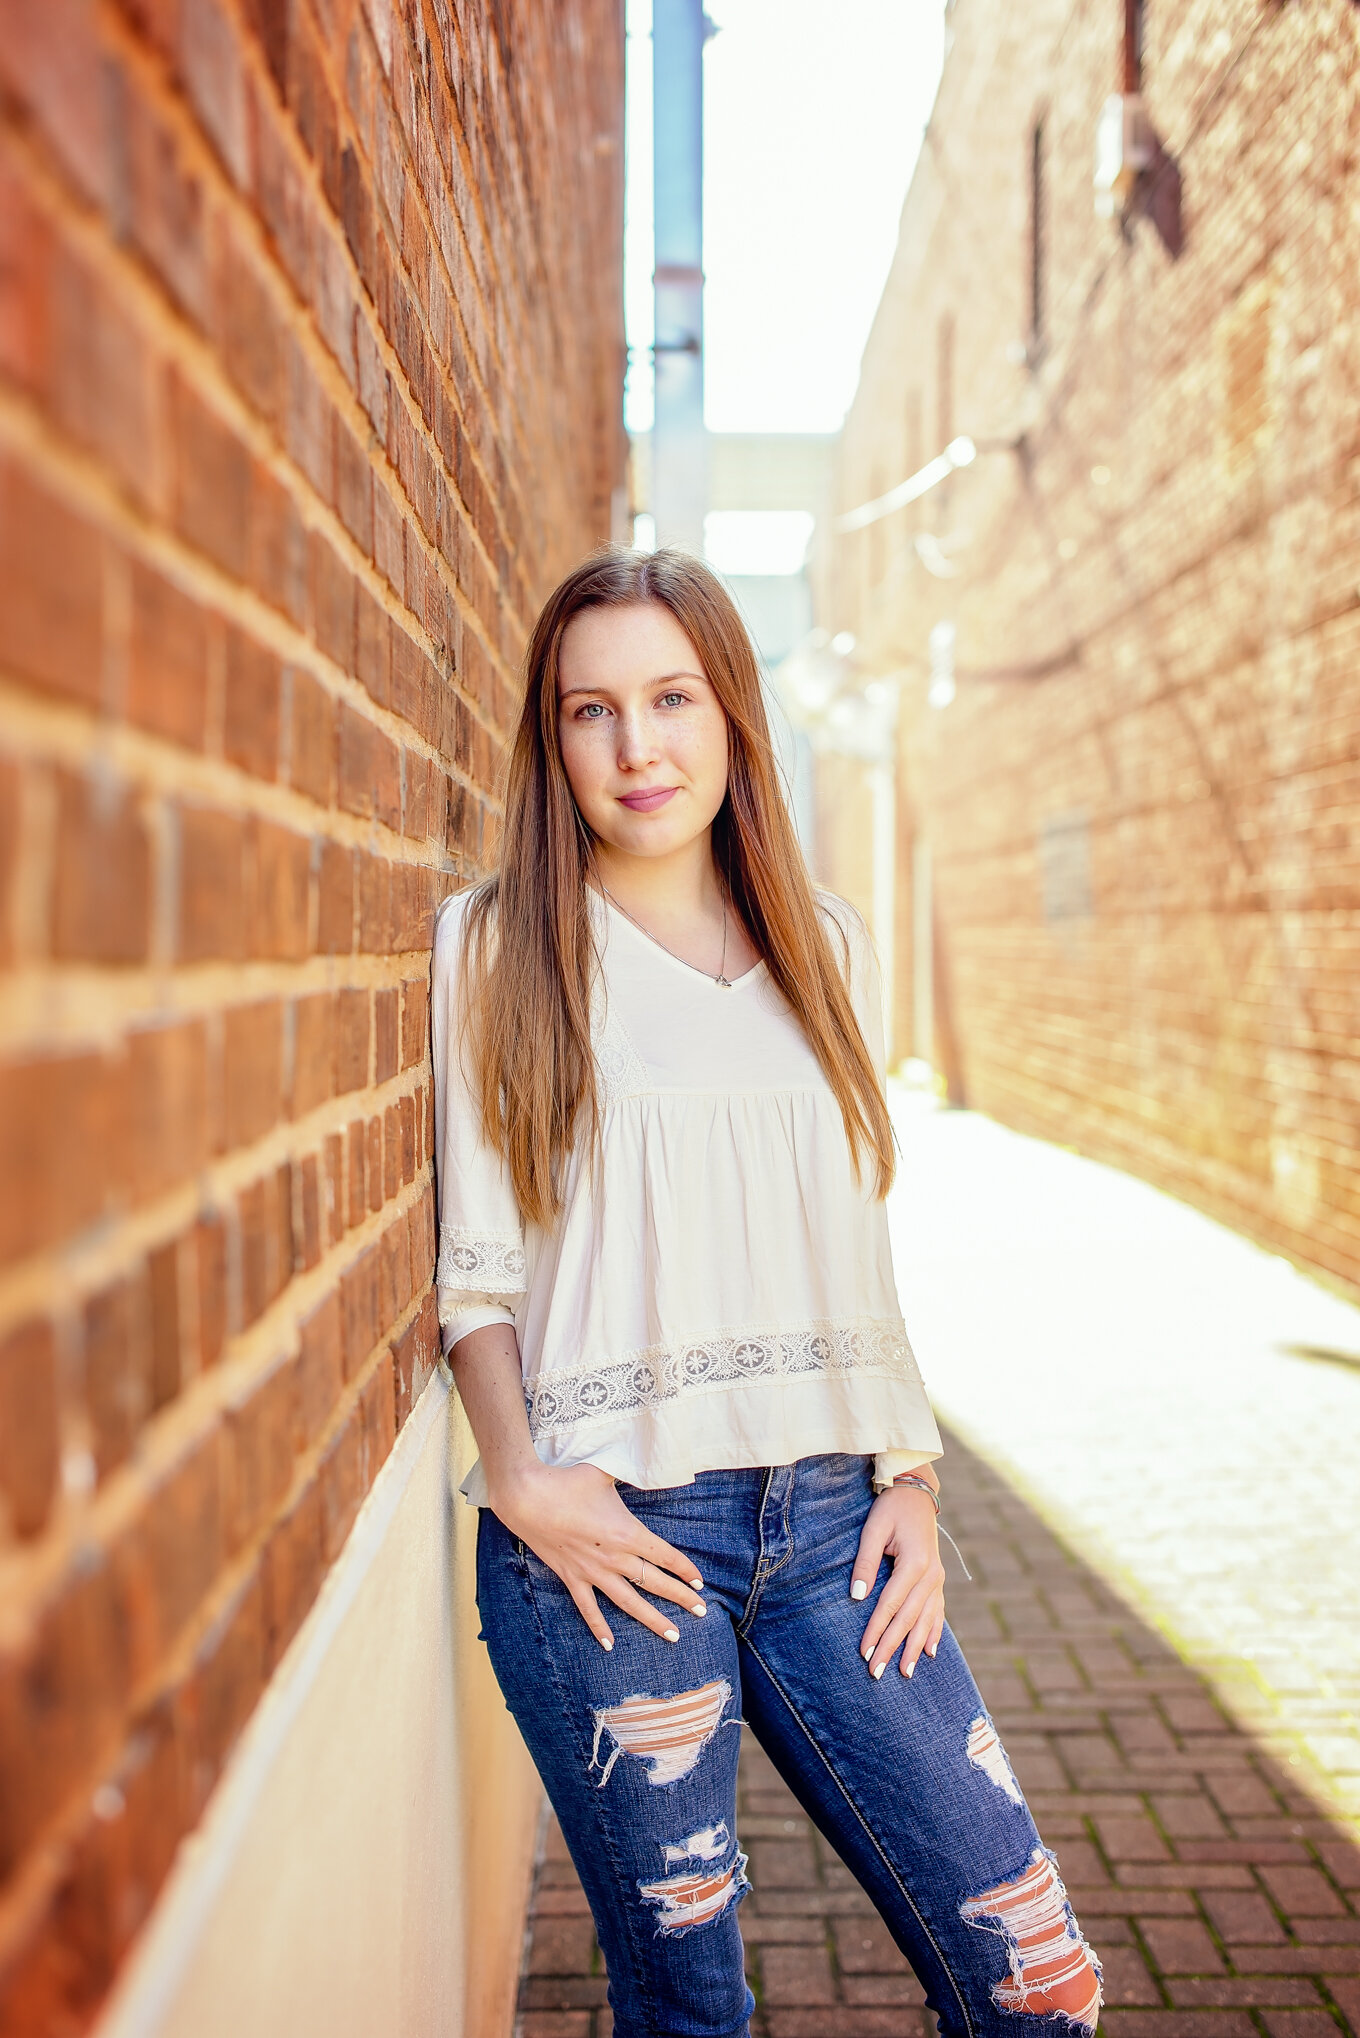 concord senior portraits by Staci noel photography